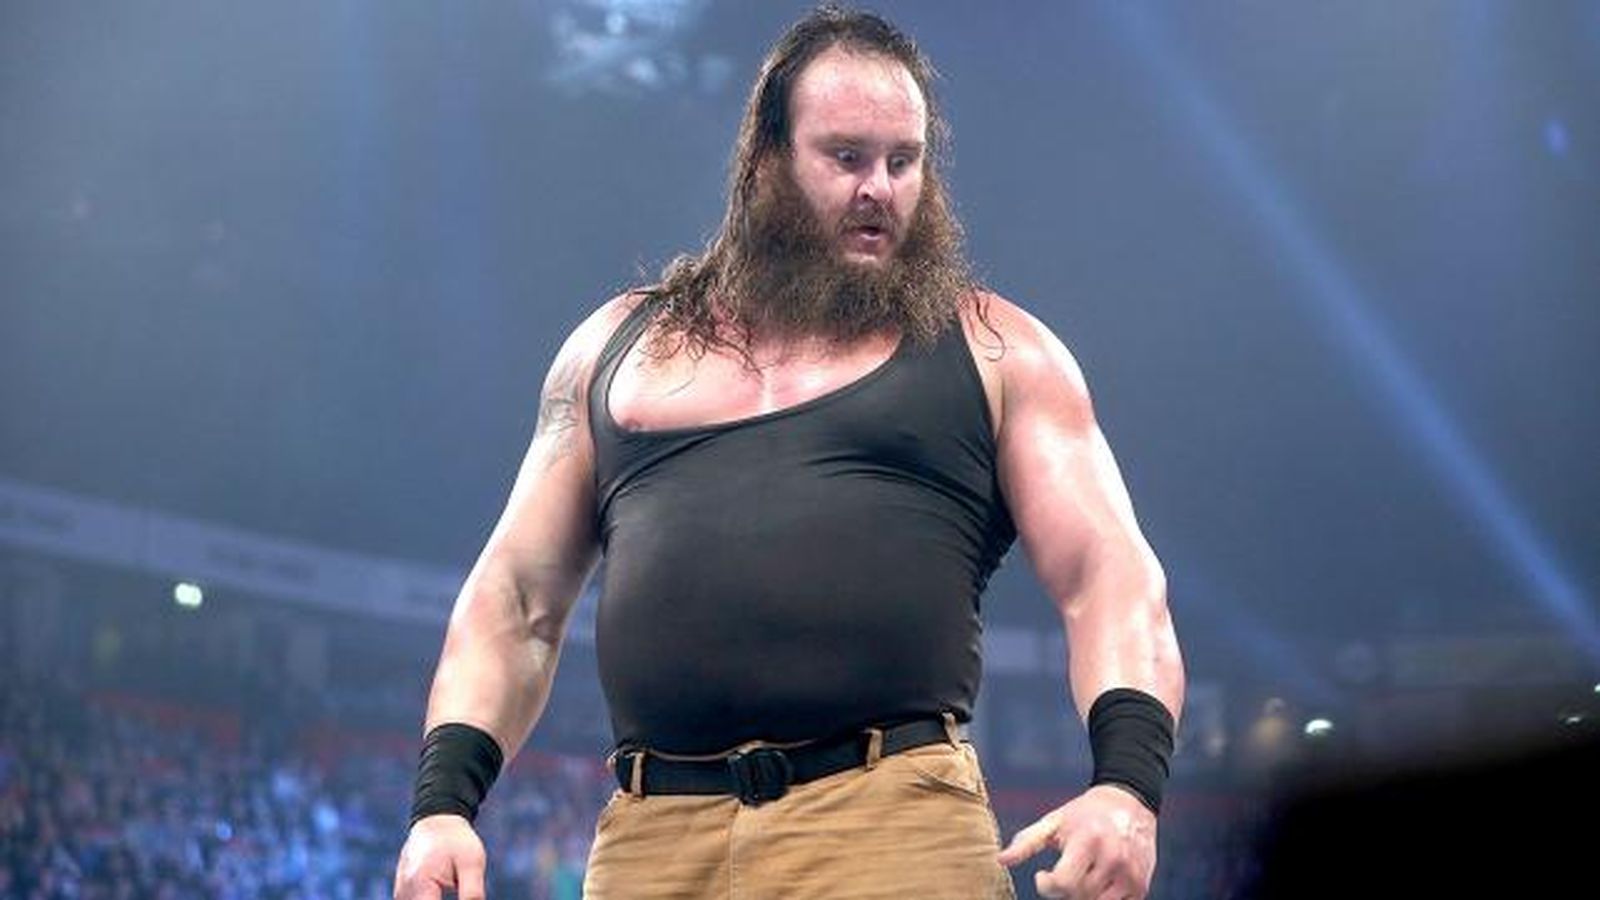 TOP HD WALLPAPER BACKROUND IMAGE FULL HD PICTURES AND PHOTOS ARE FREE DAWONLOD: Wwe Raw 44 Braun Strowman HD Picture Wallpaper Image Photo Download